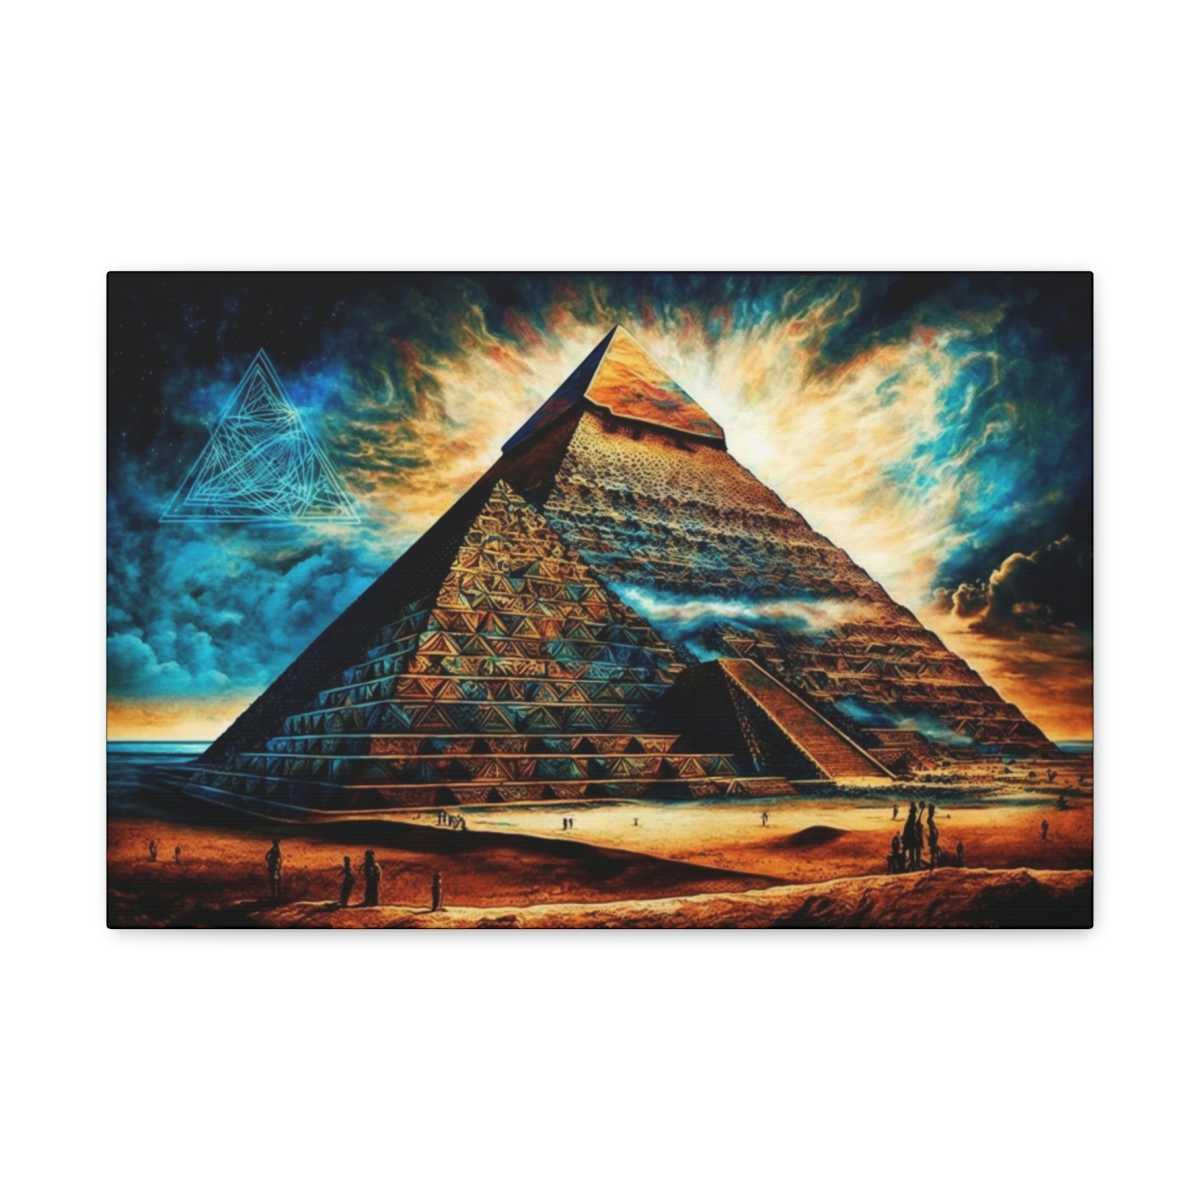 Trippy Art Canvas Print: The Wonder By Nile River